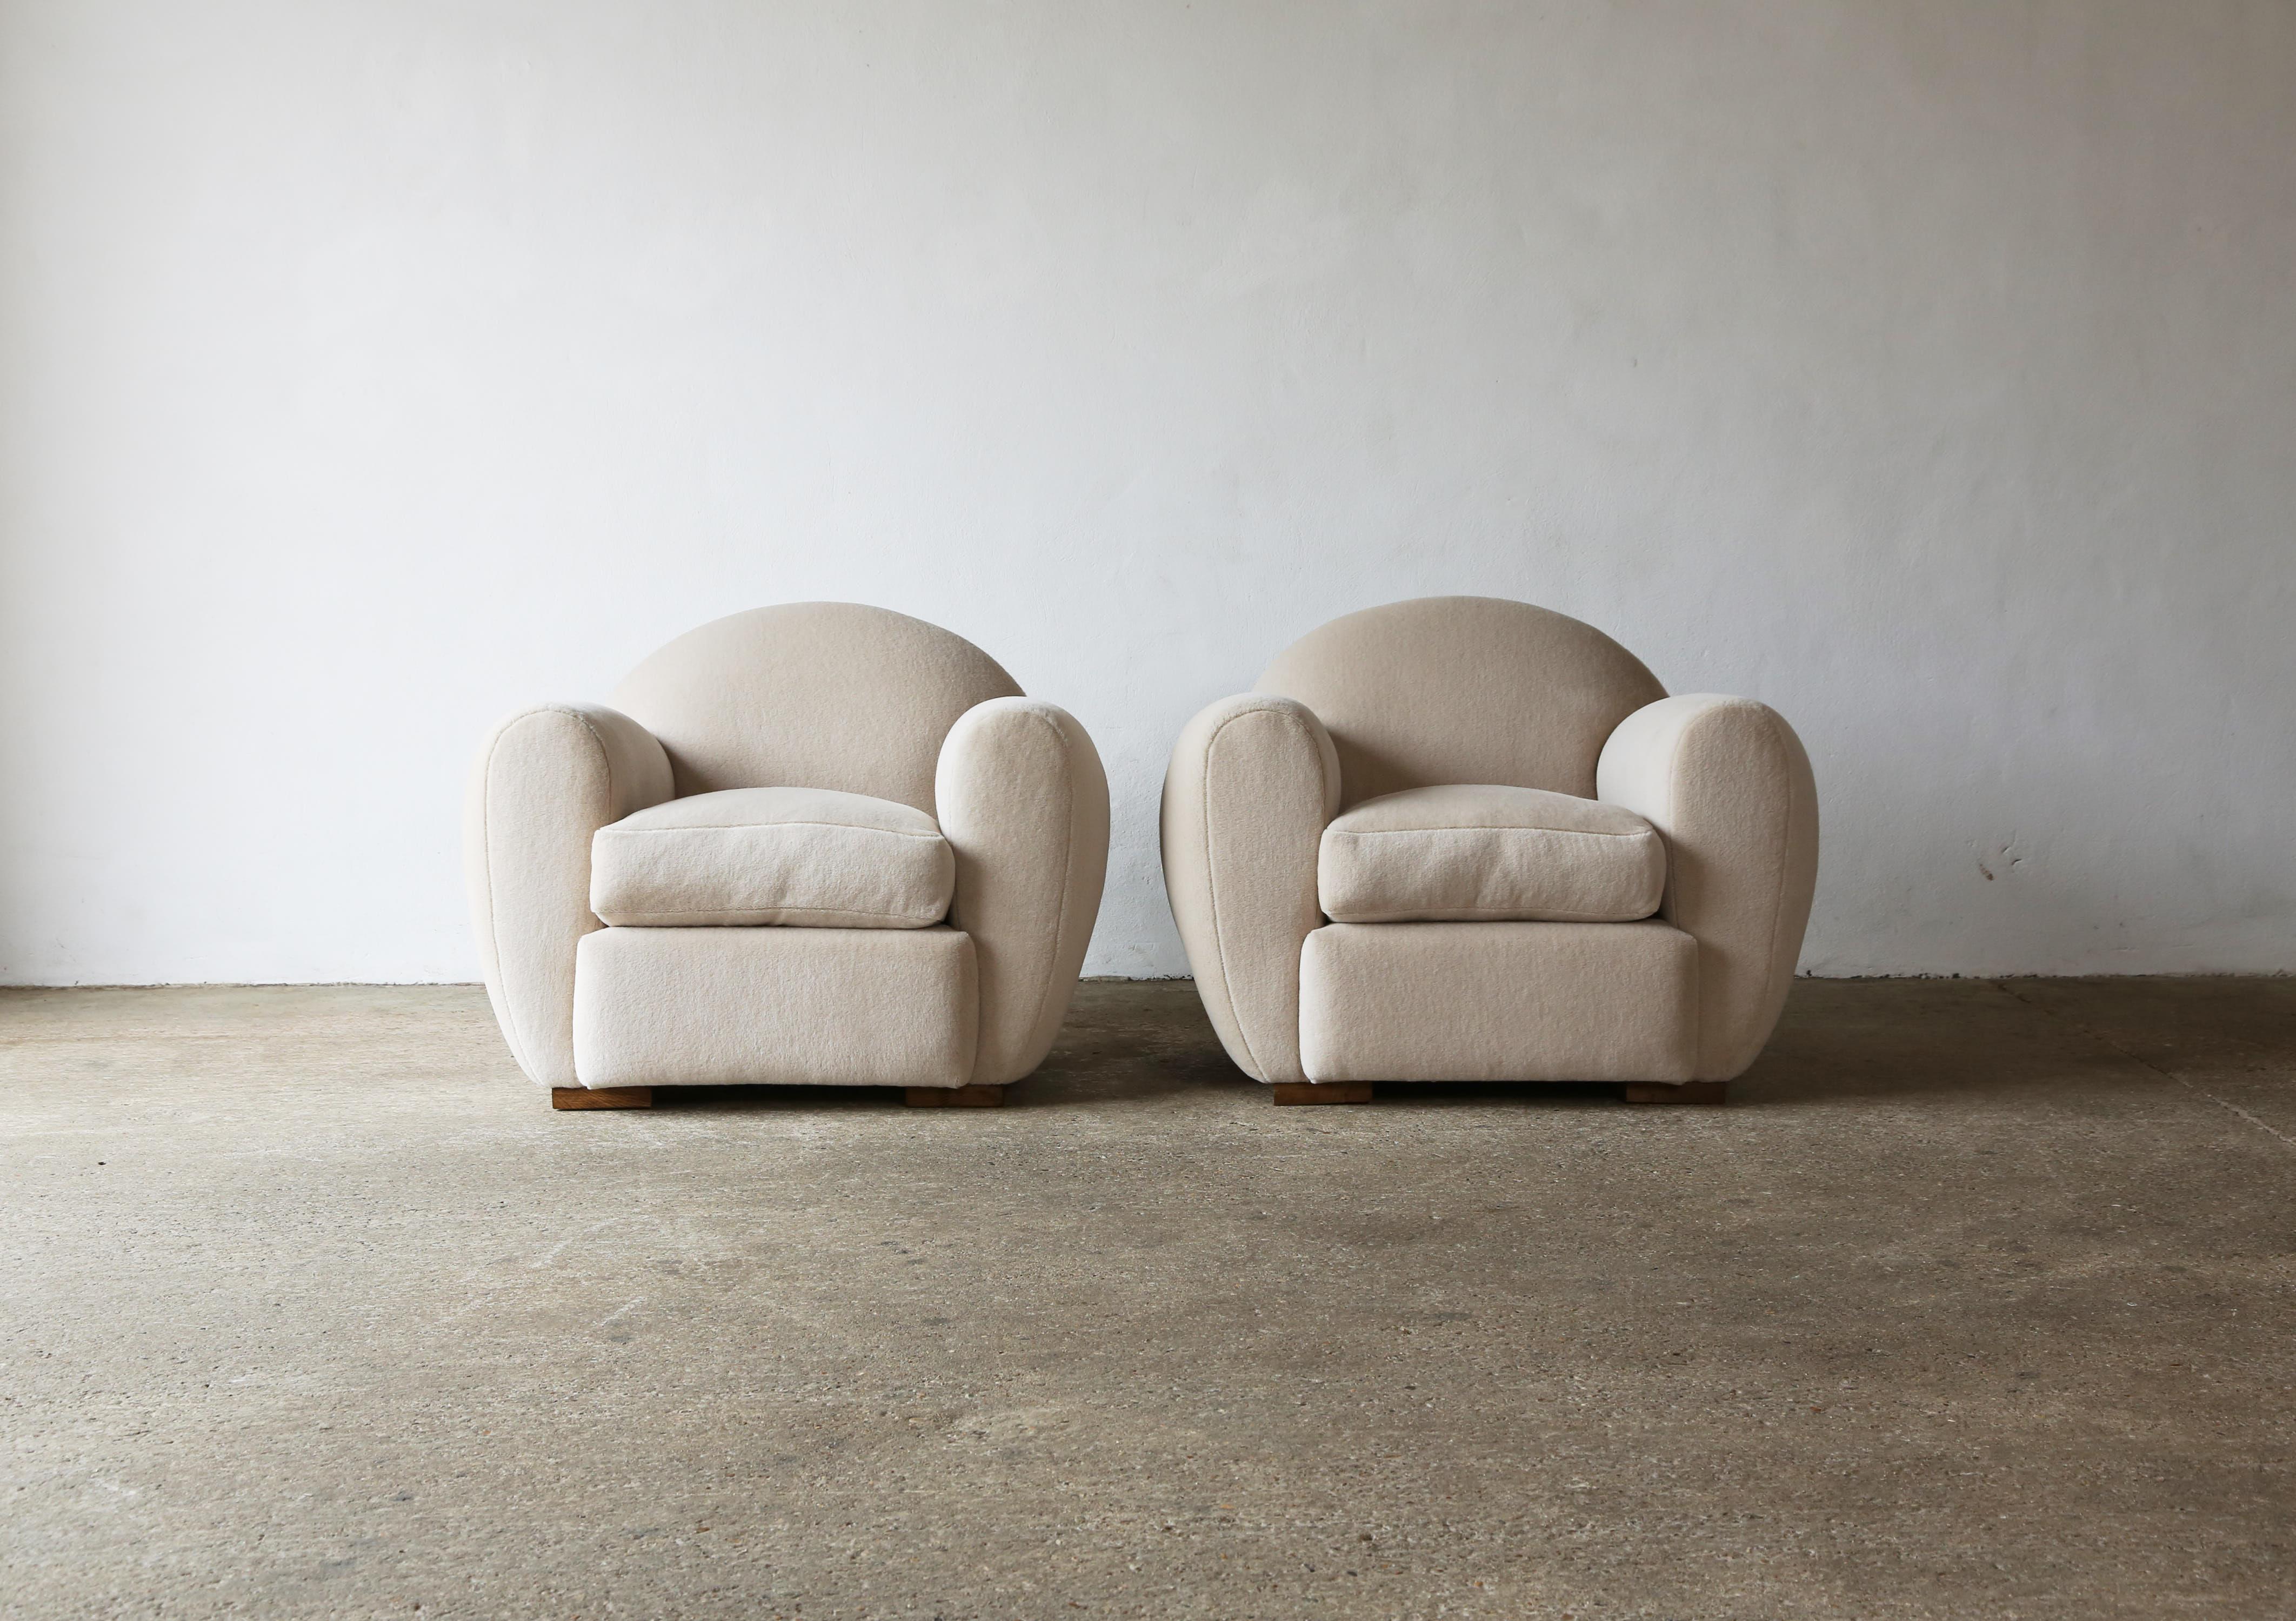 Art Deco Superb Pair of Round Leaning Club Chairs, Upholstered in Pure Alpaca